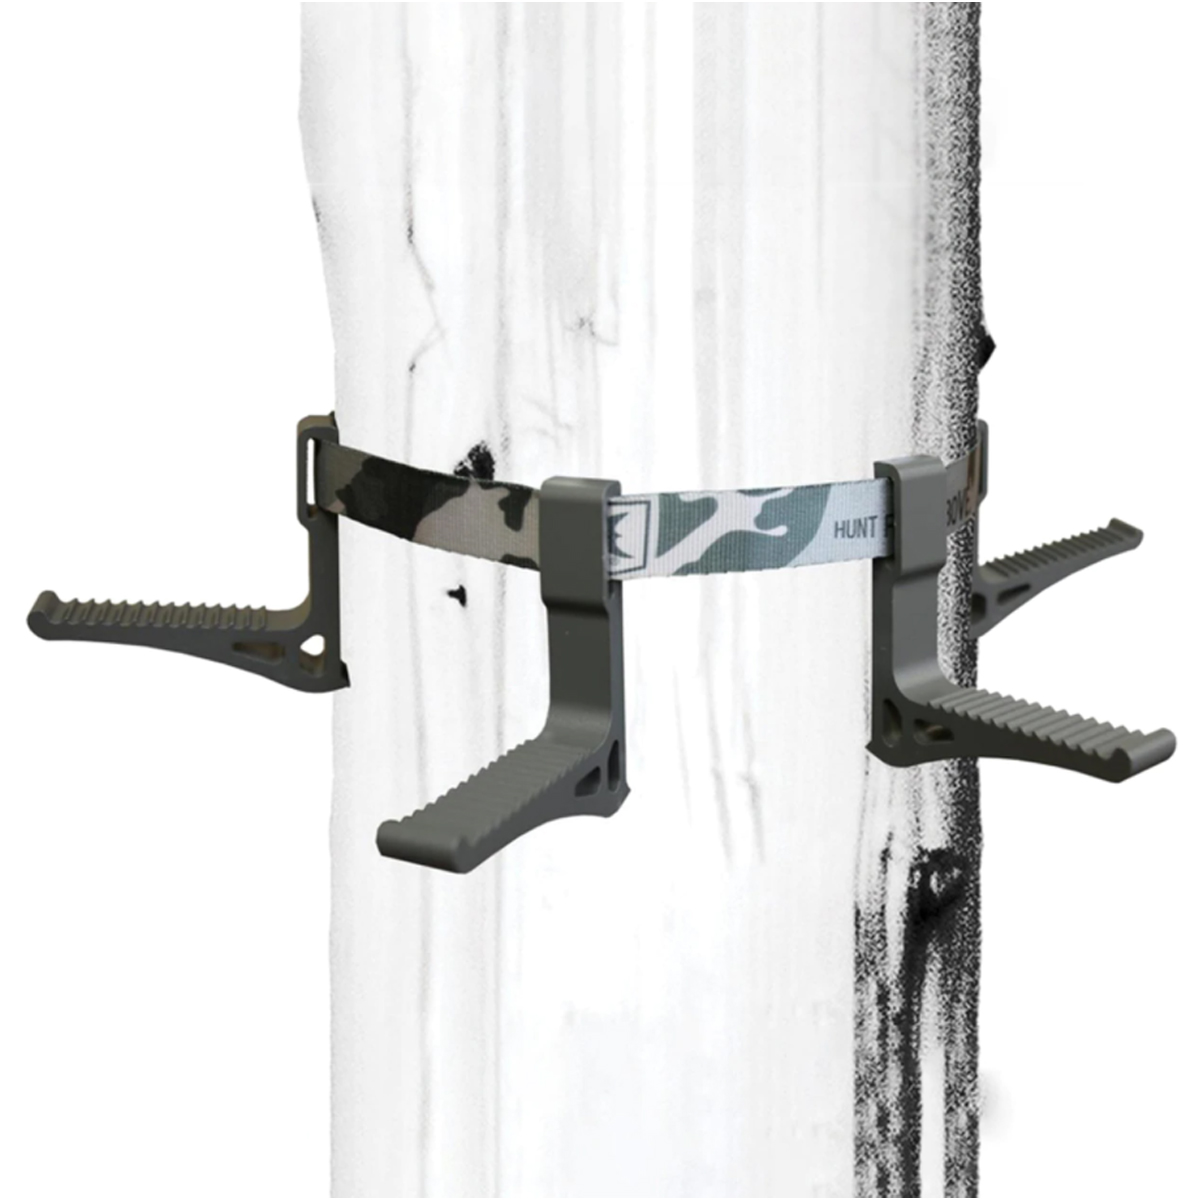 HAWK MONKEY BAR STEPS WITH STRAPS - 4 PACK Photo